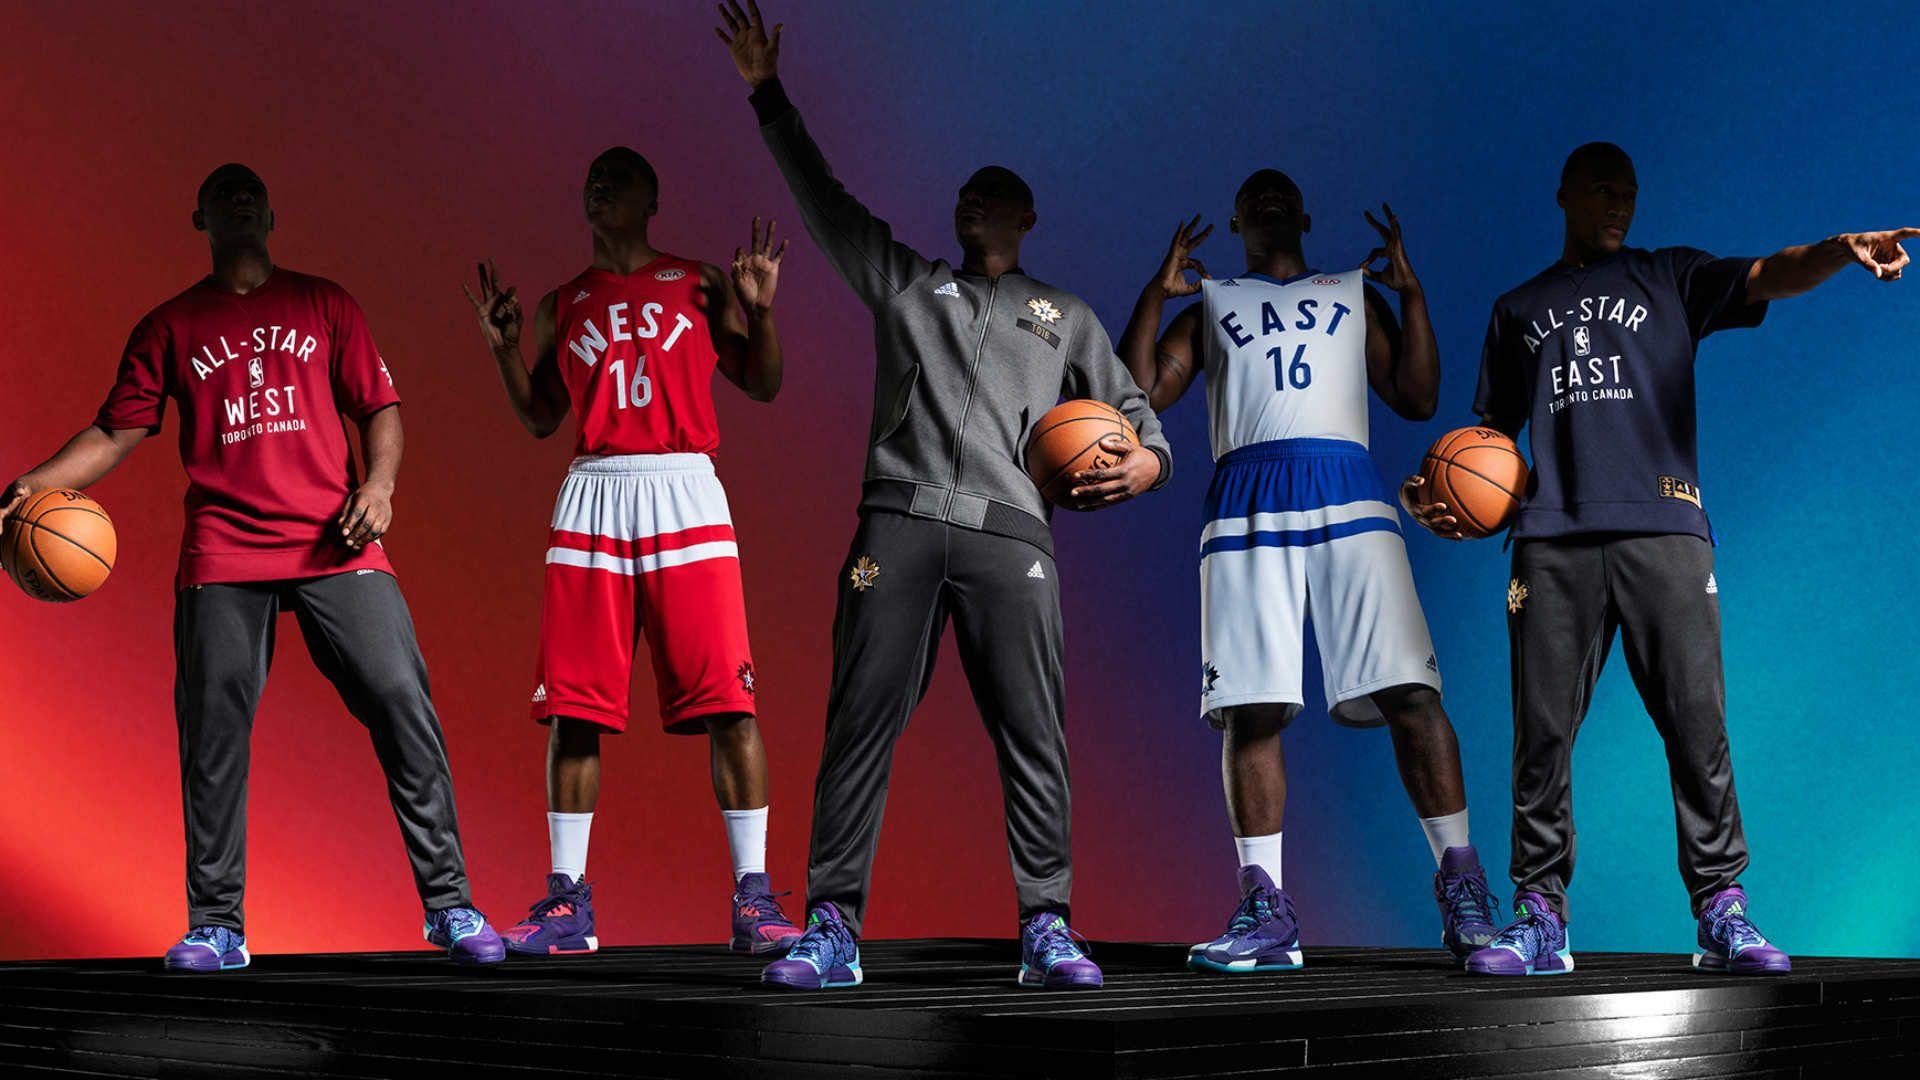 NBA All Star Jerseys Have Canada Themes All Over. NBA